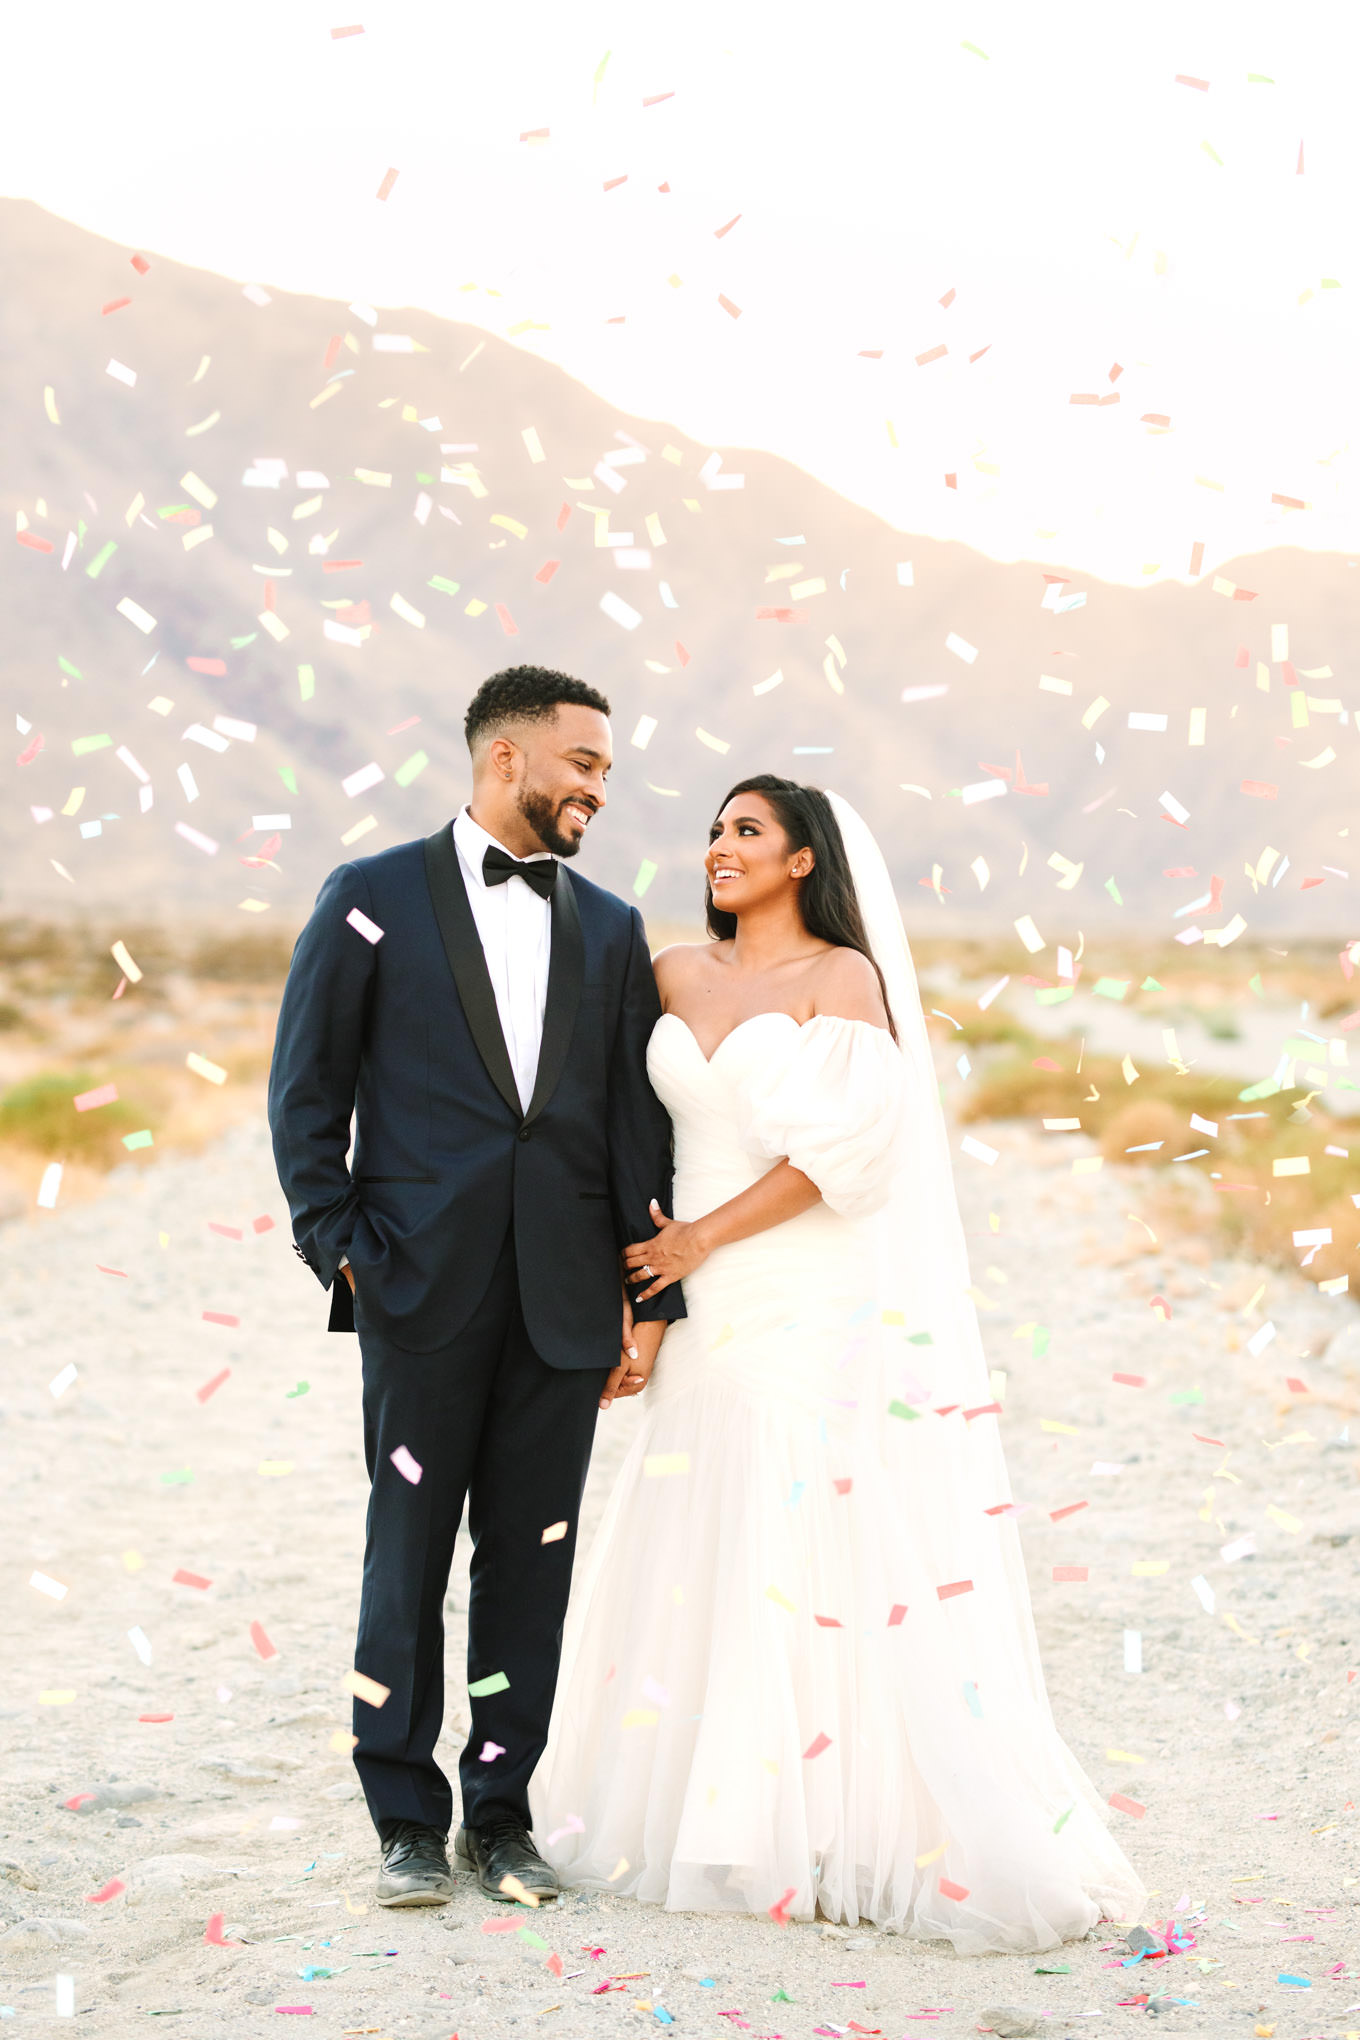 Biodegradable confetti toss during Palm Springs elopement | Engagement, elopement, and wedding photography roundup of Mary Costa’s favorite images from 2020 | Colorful and elevated photography for fun-loving couples in Southern California | #2020wedding #elopement #weddingphoto #weddingphotography #microwedding   Source: Mary Costa Photography | Los Angeles